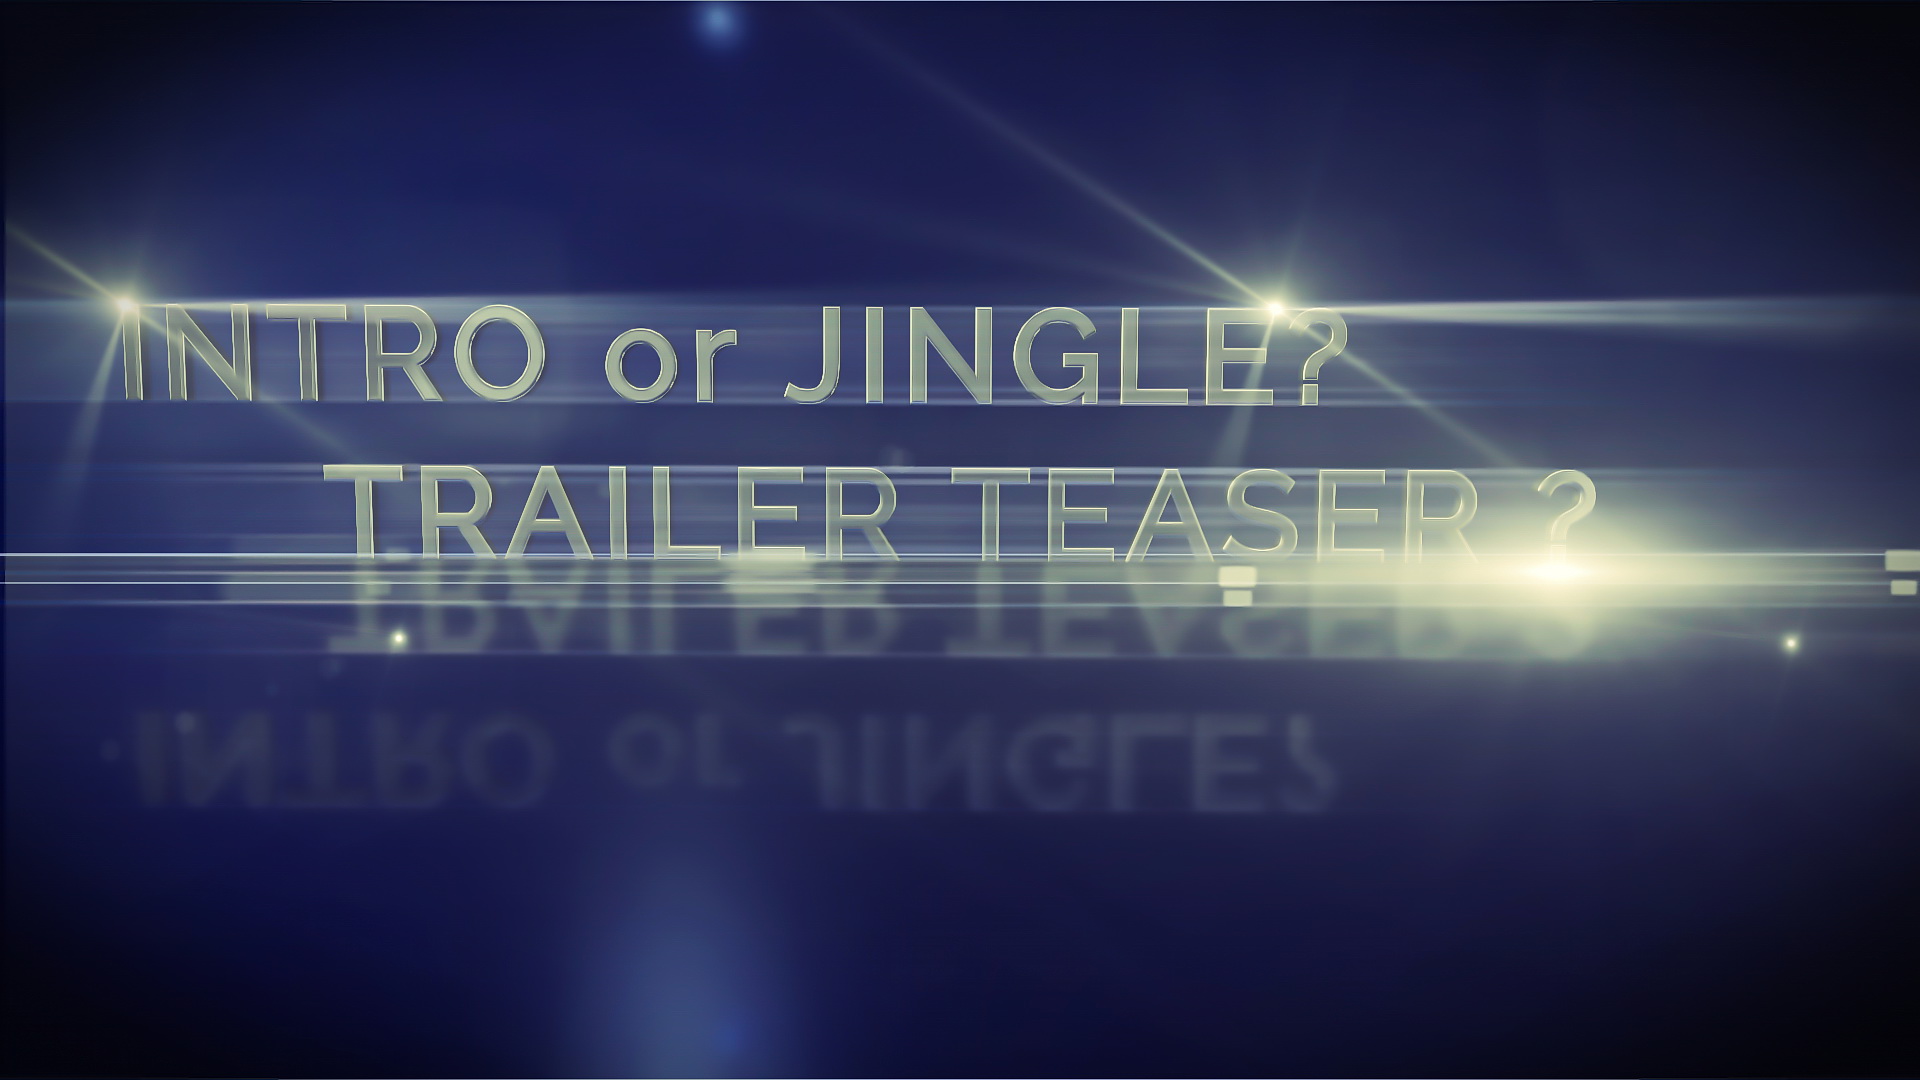 What Is The Difference Between Trailer Teaser Intro And Jingle Music